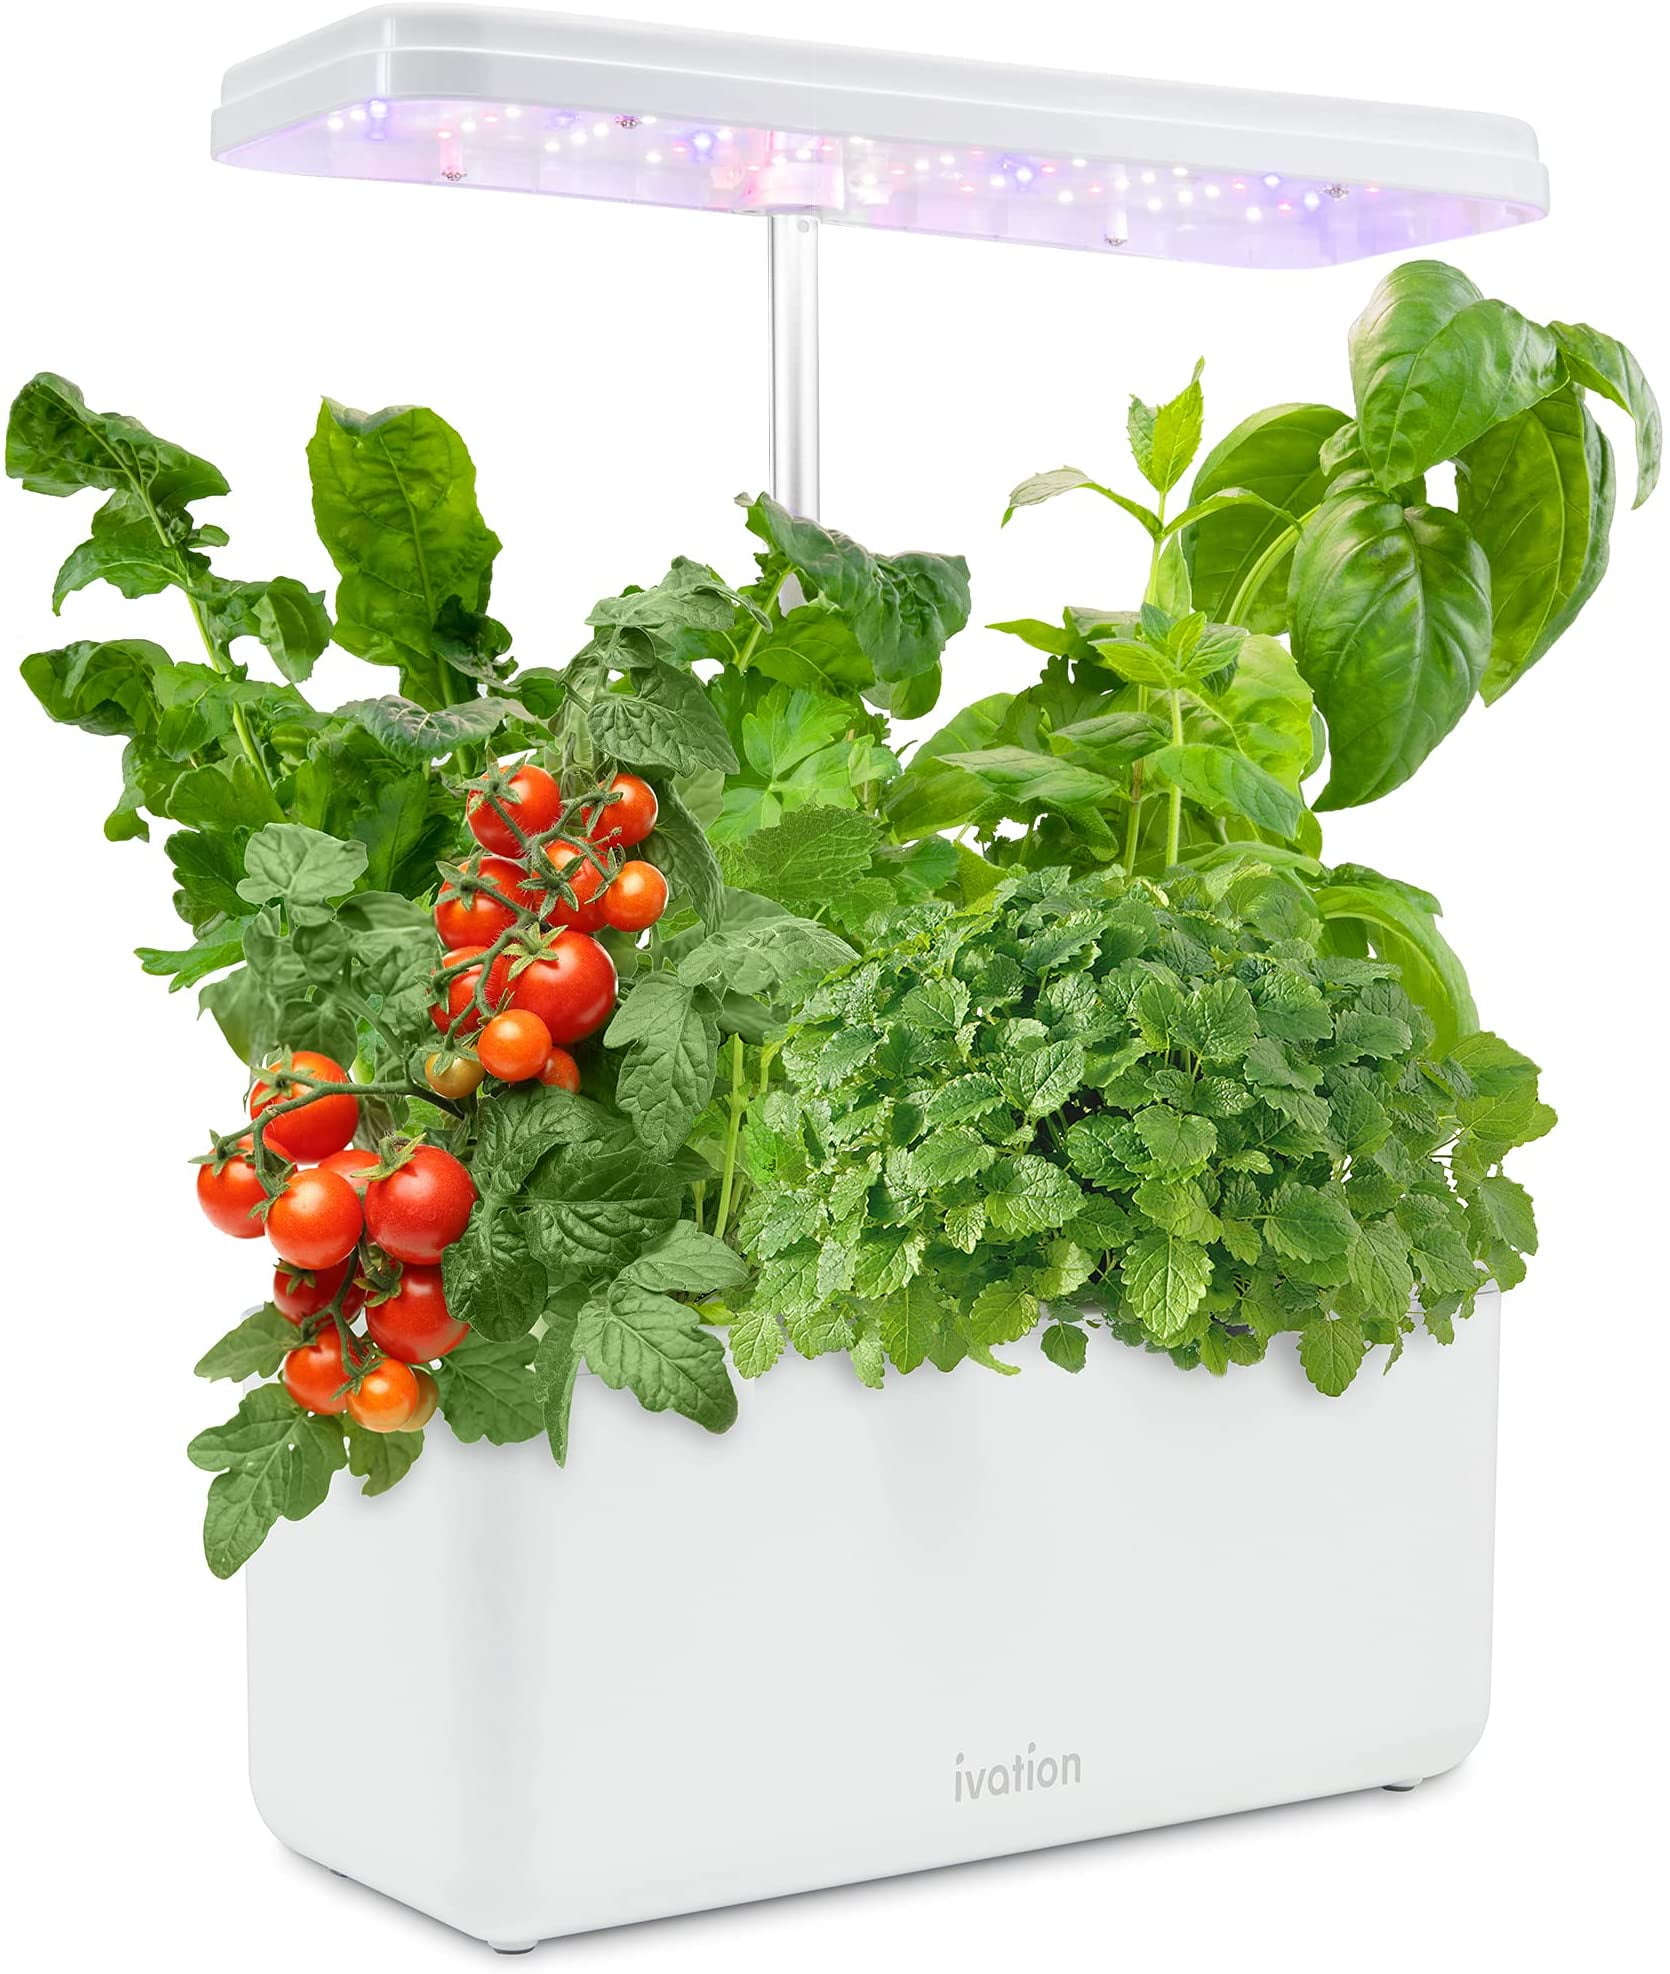 Indoor Hydroponic Growing System Garden LED Grow Light Planter 18 Pods US 